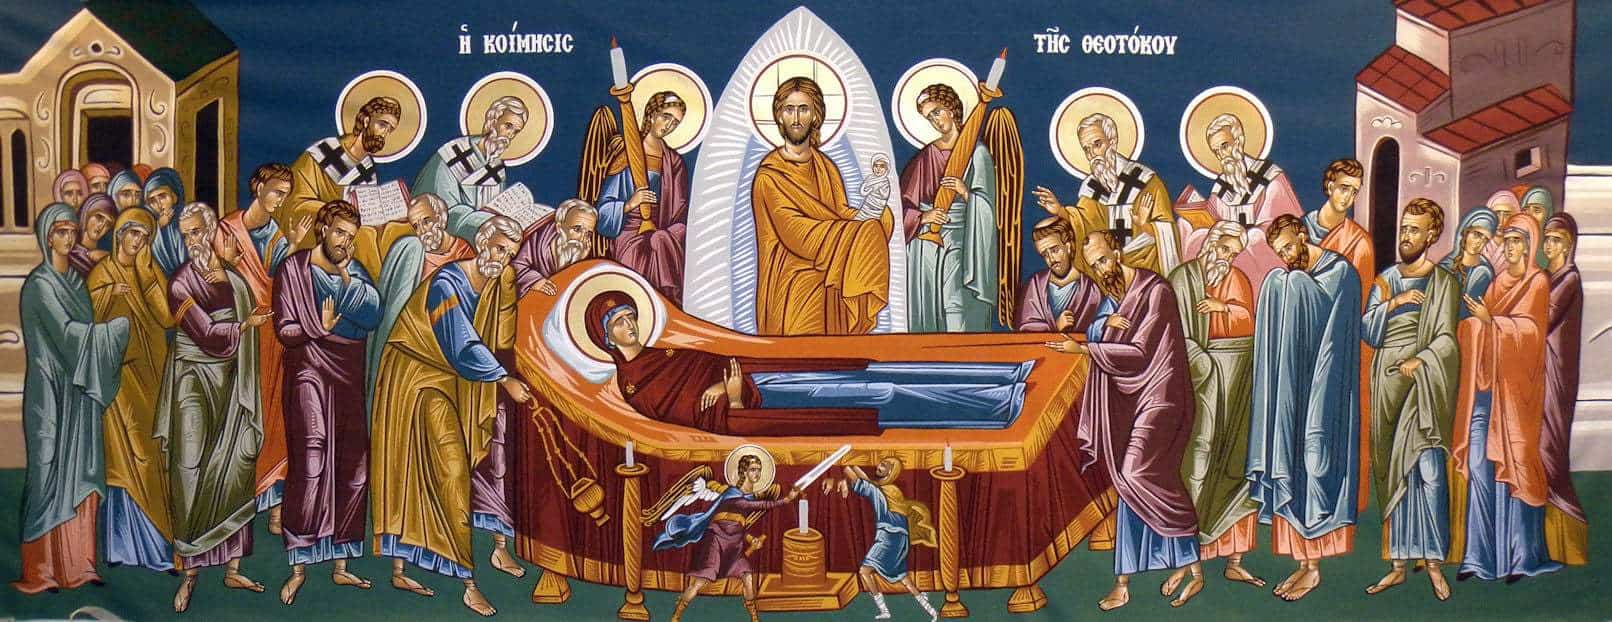 Apodosis of the Dormition of our Most Holy Lady the Theotokos and Ever Virgin Mary